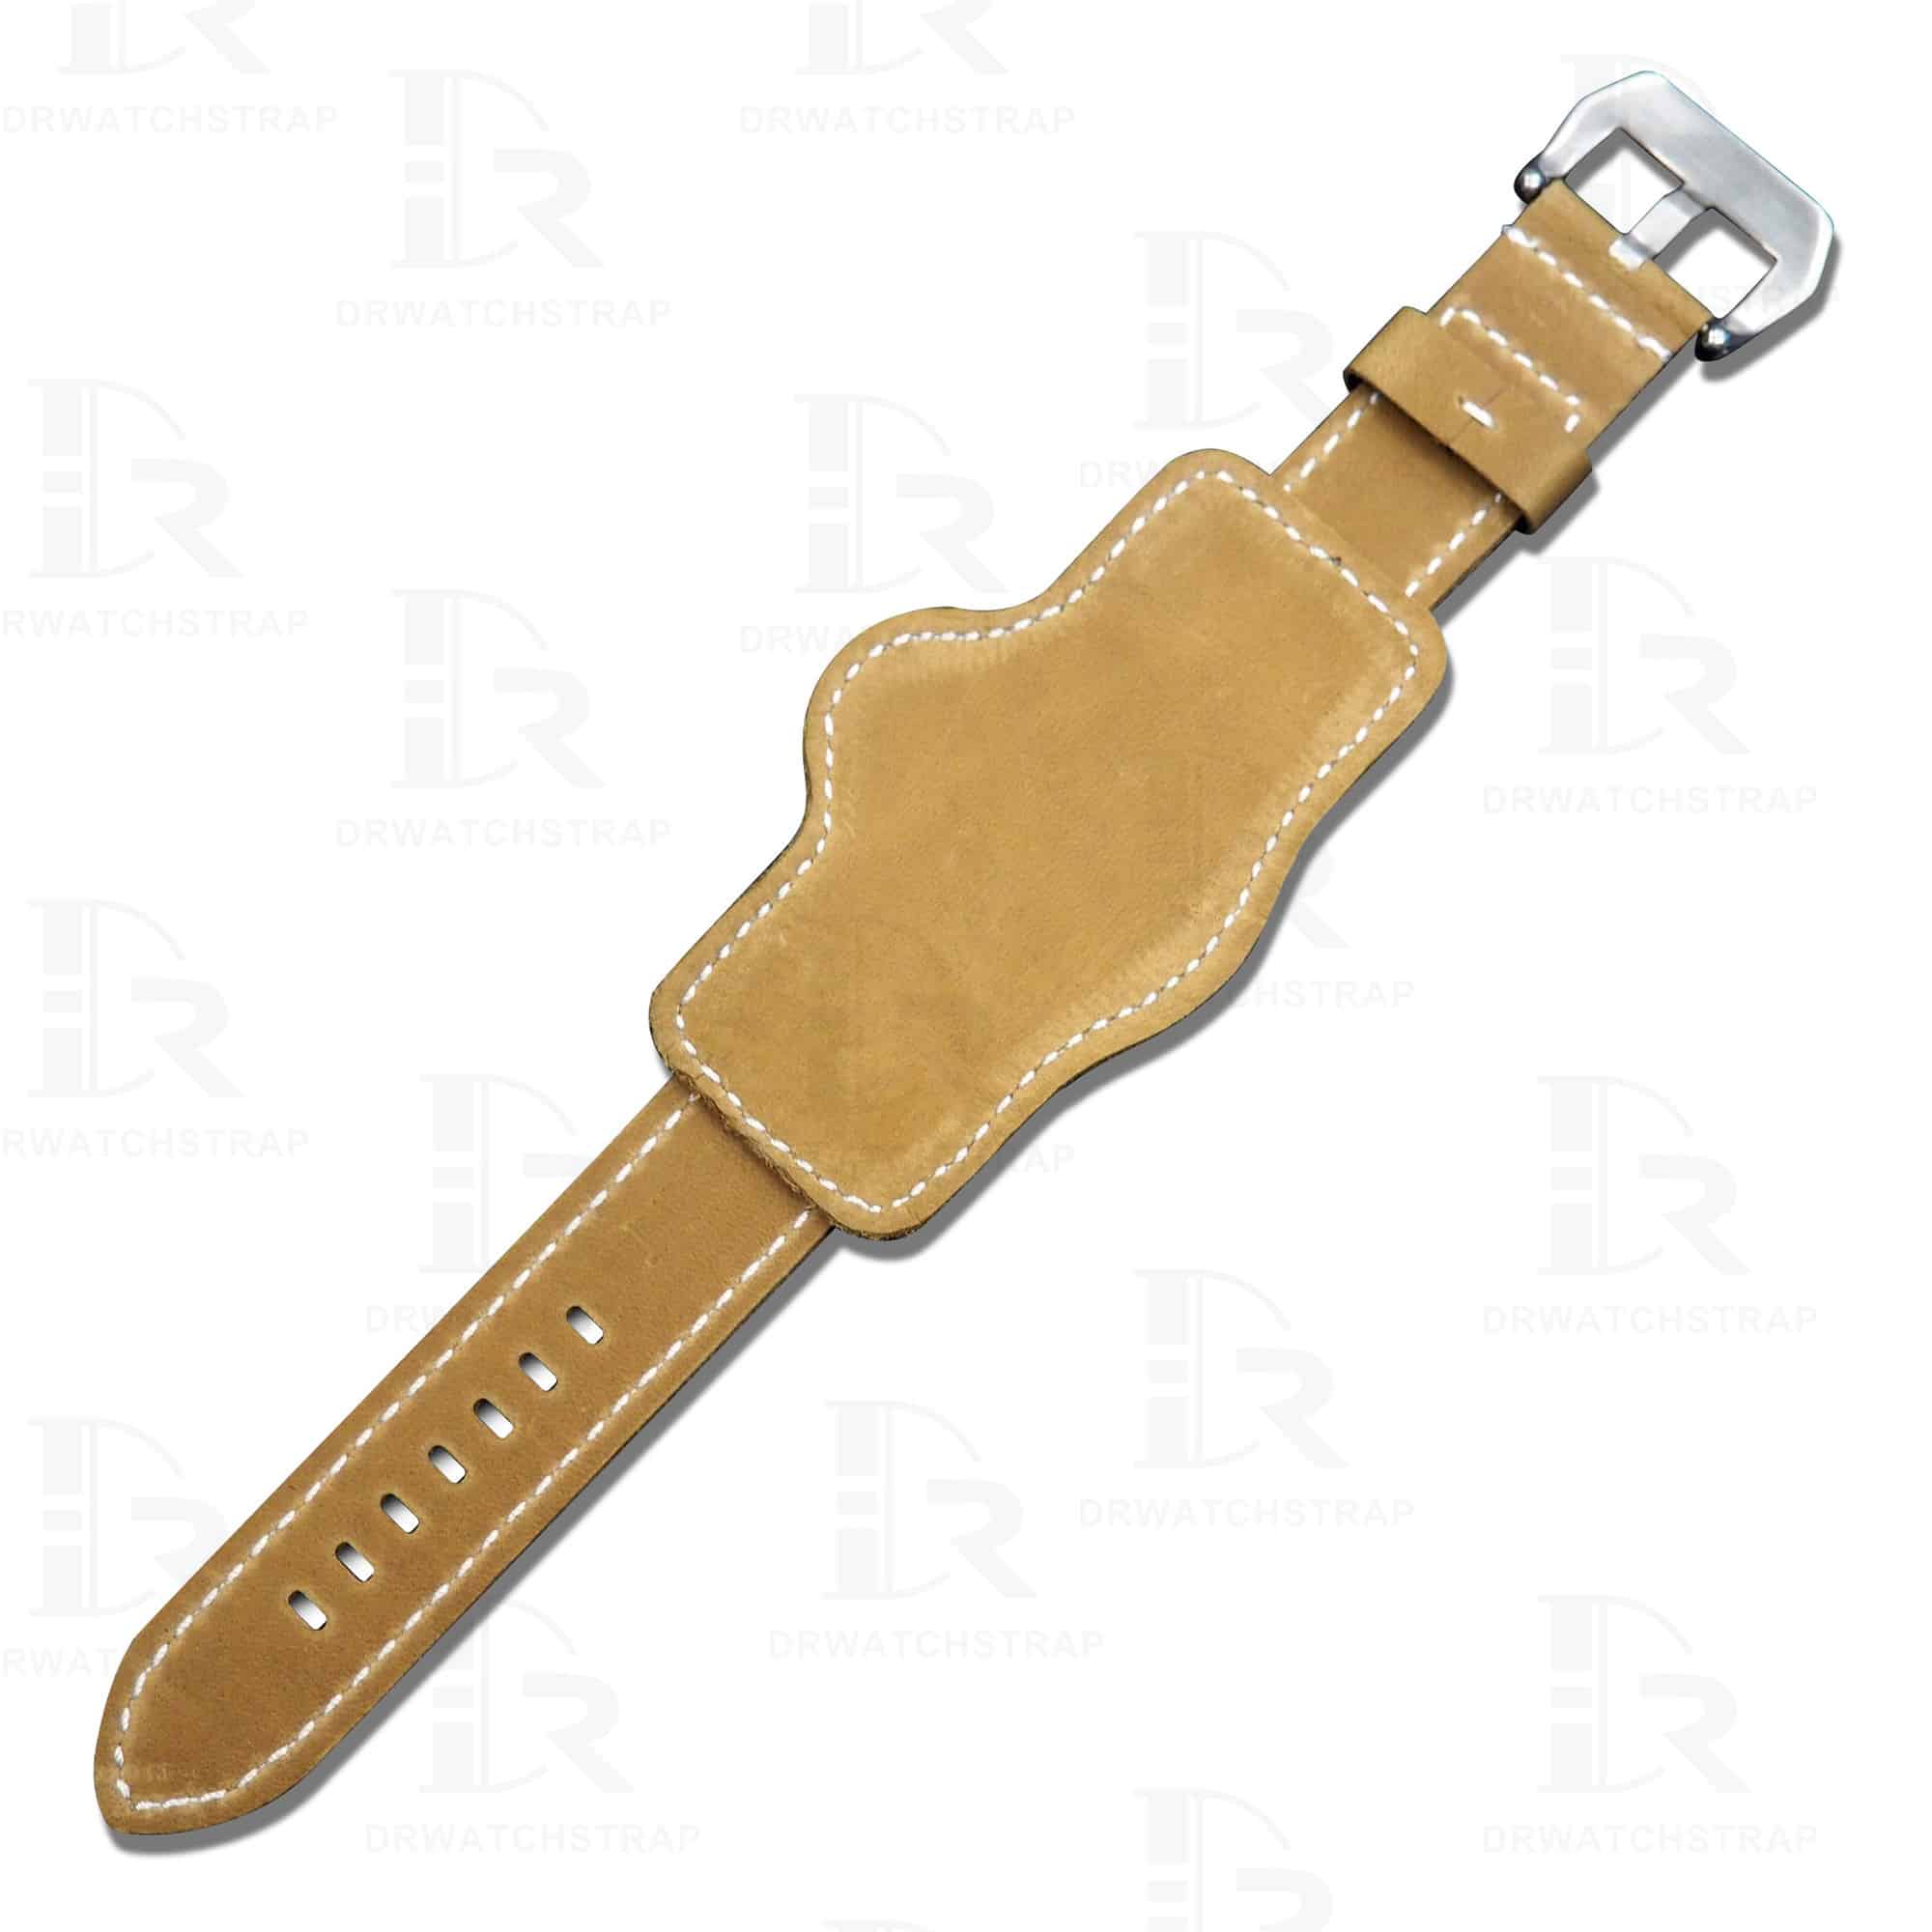 Genuine best OEM aftermarket handmade brown Panerai suede calfskin leather watch bund Strap and watch band replacement for Panerai Luminor Radiomir luxury watches from DR Watchstrap - Shop the premium calf leather watch straps and watchbands online at a low price